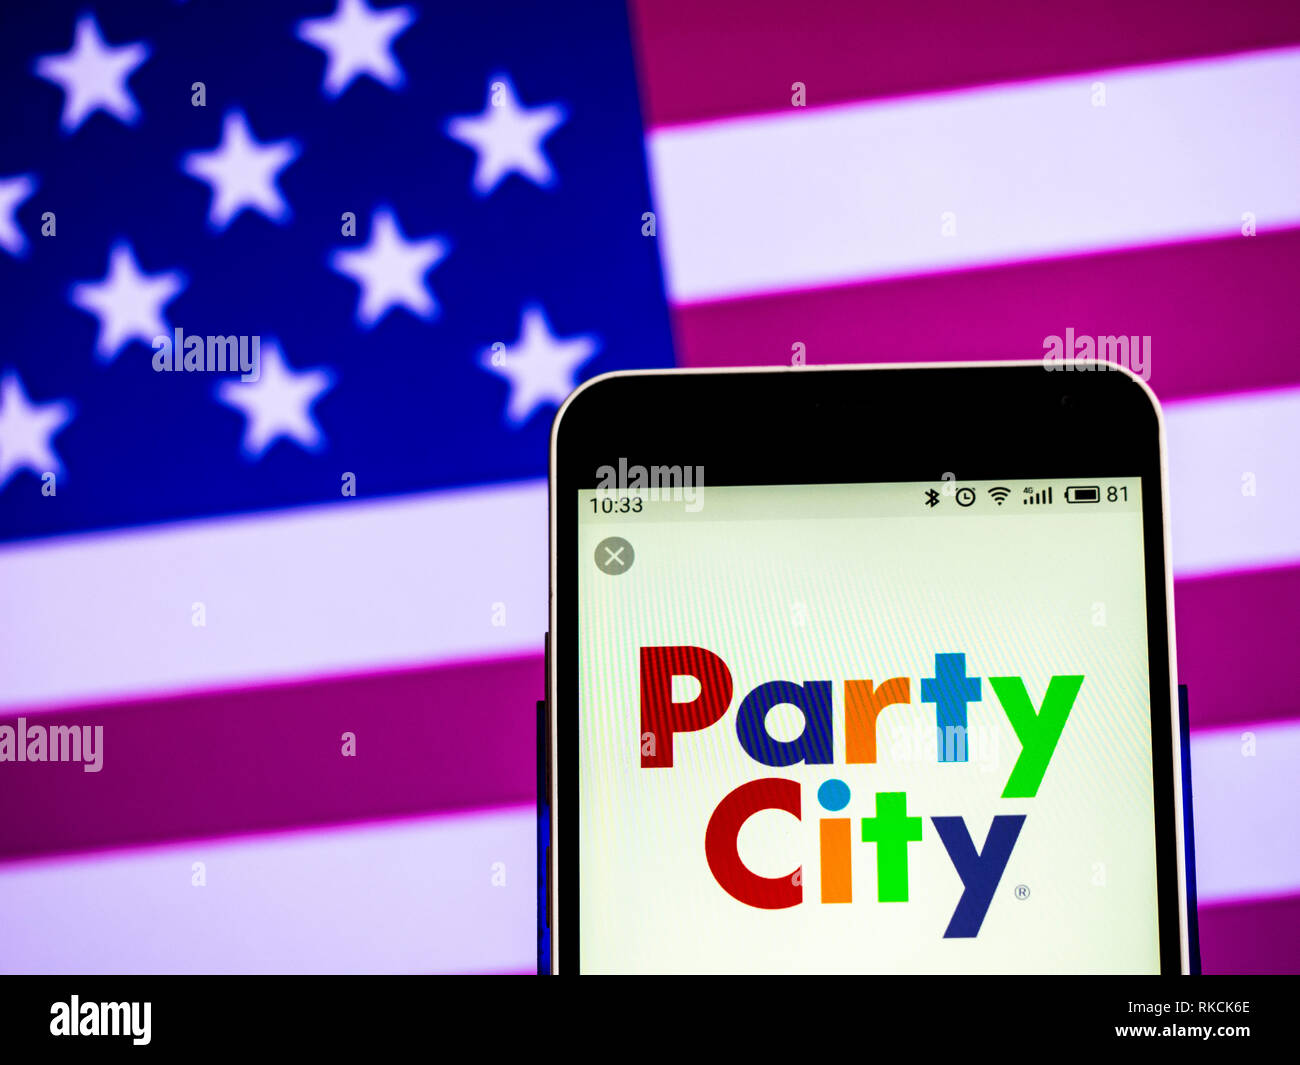 Party City Retail chain company  logo seen displayed on a smart phone. Stock Photo